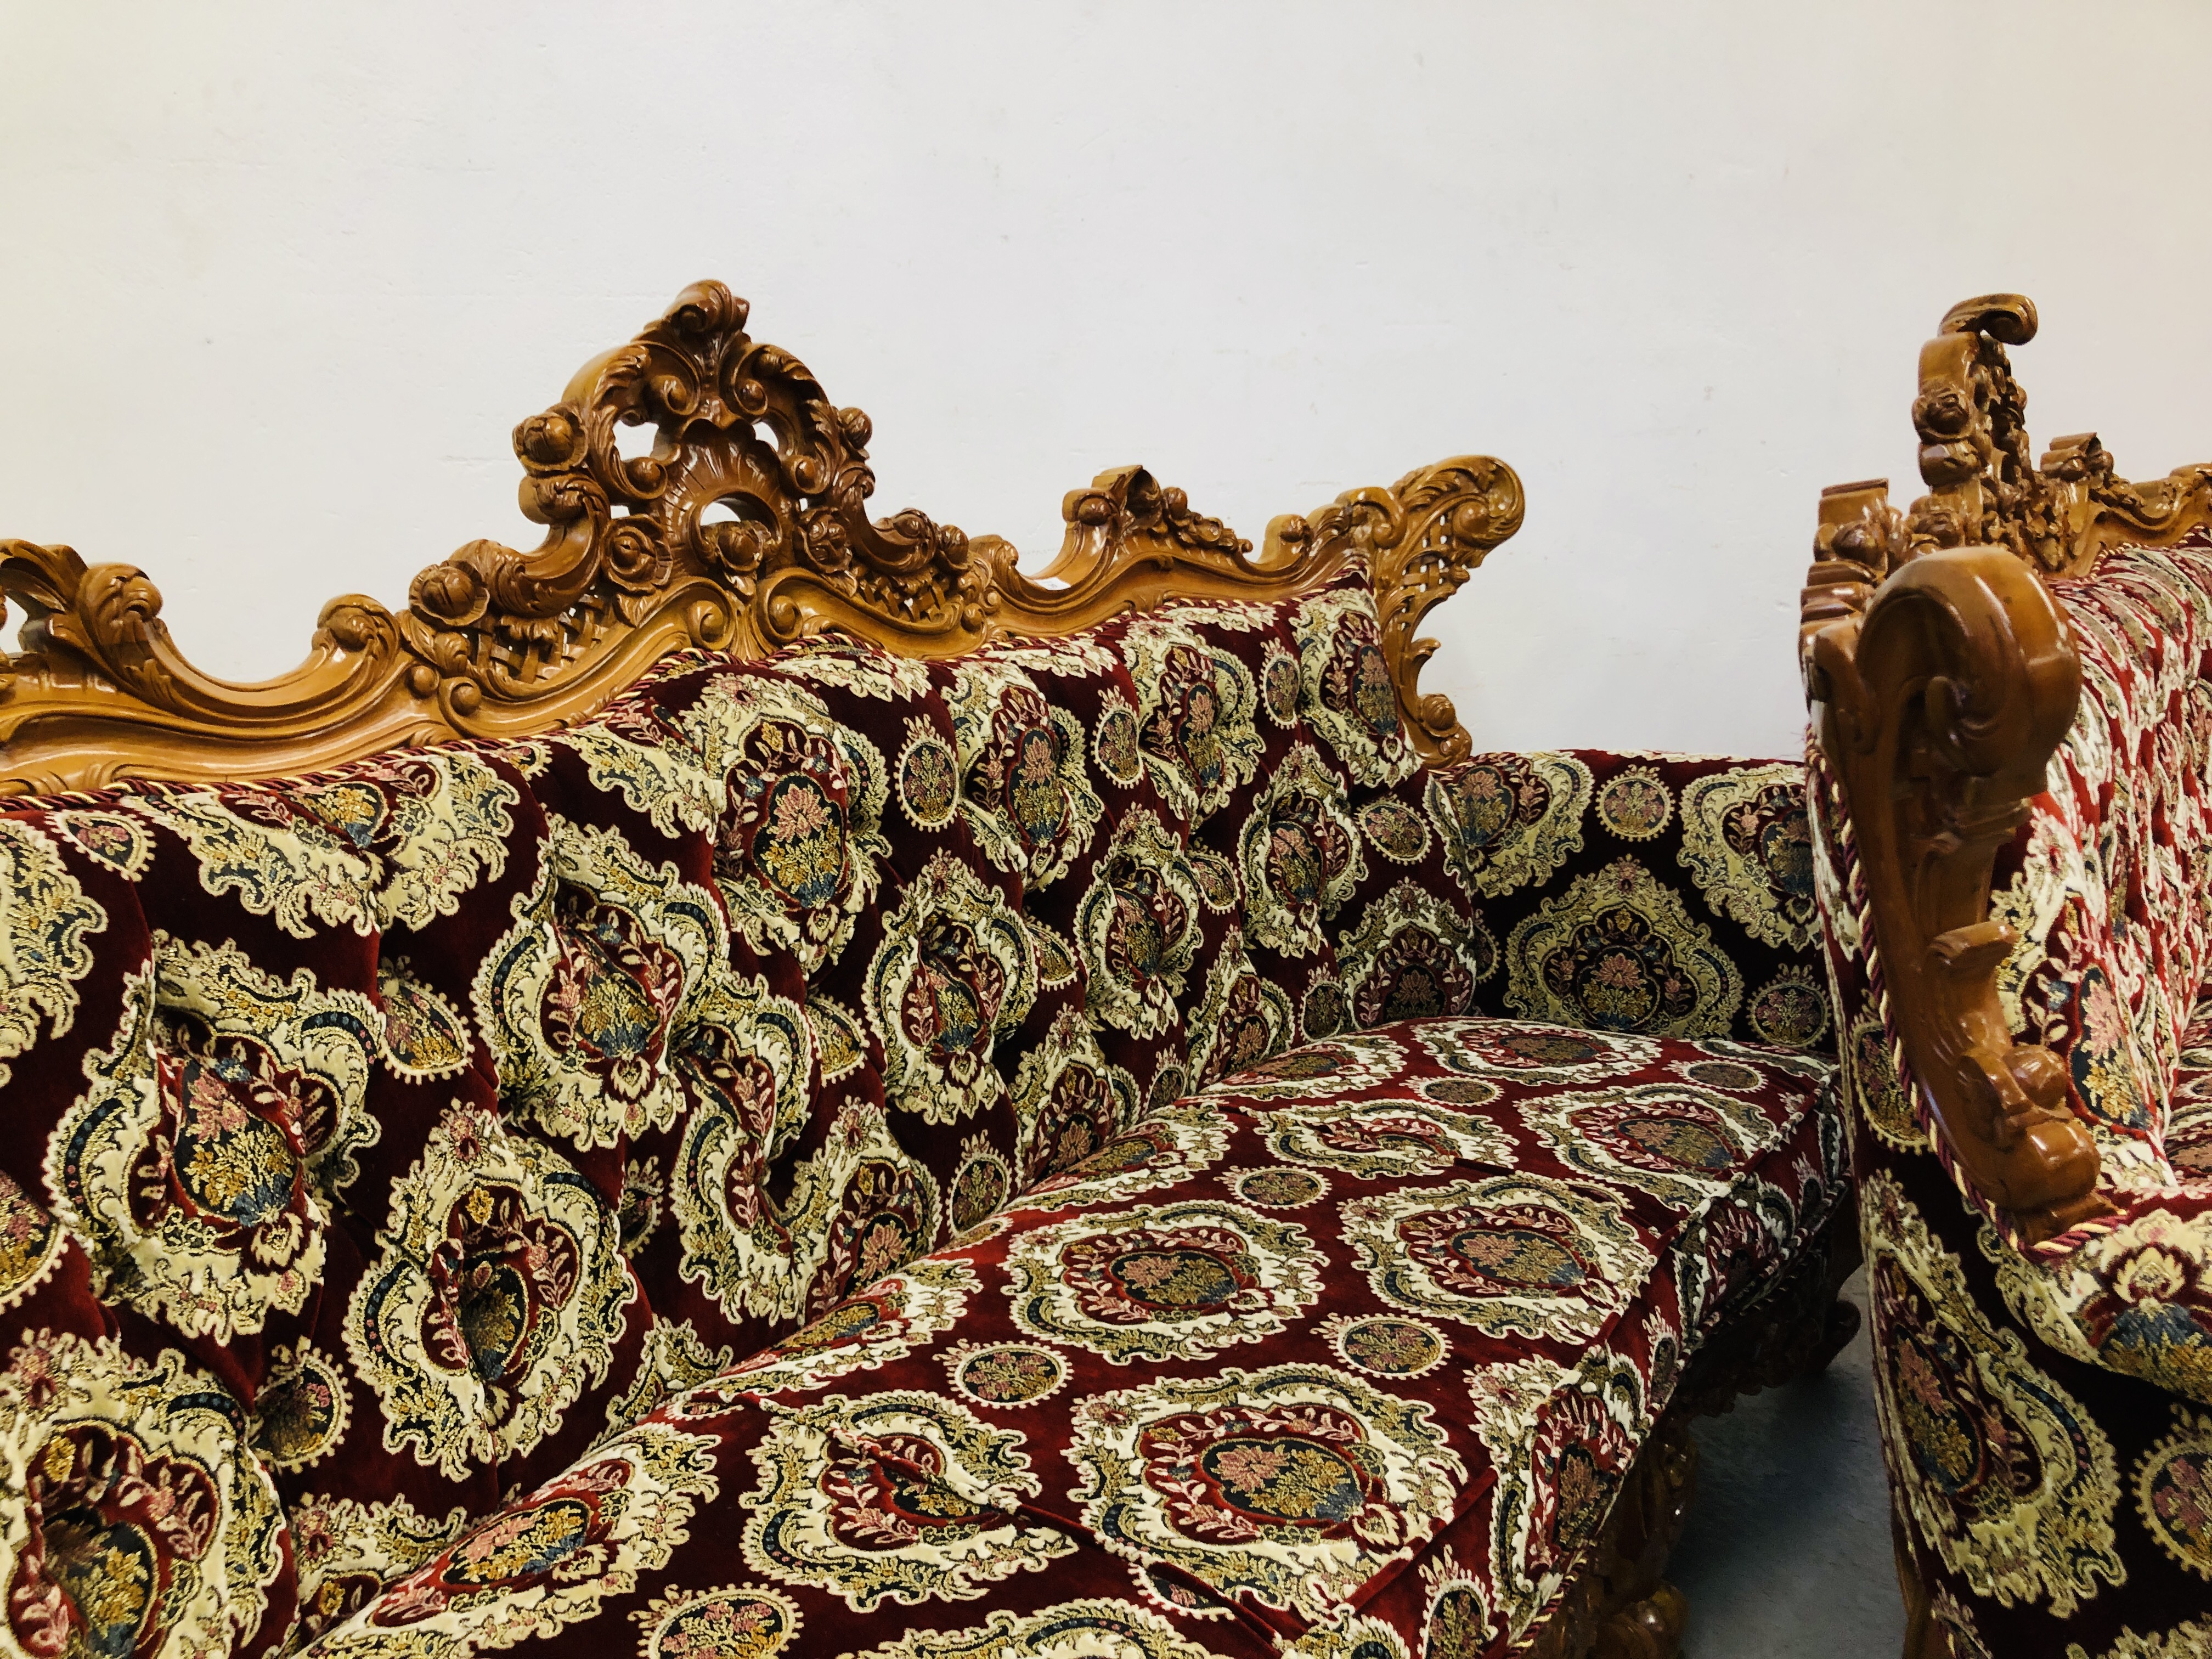 A PAIR OF HIGHLY DECORATIVE REPRODUCTION CONTINENTAL STYLE THREE SEATER COUCHES - NON COMPLIANT - Image 11 of 14